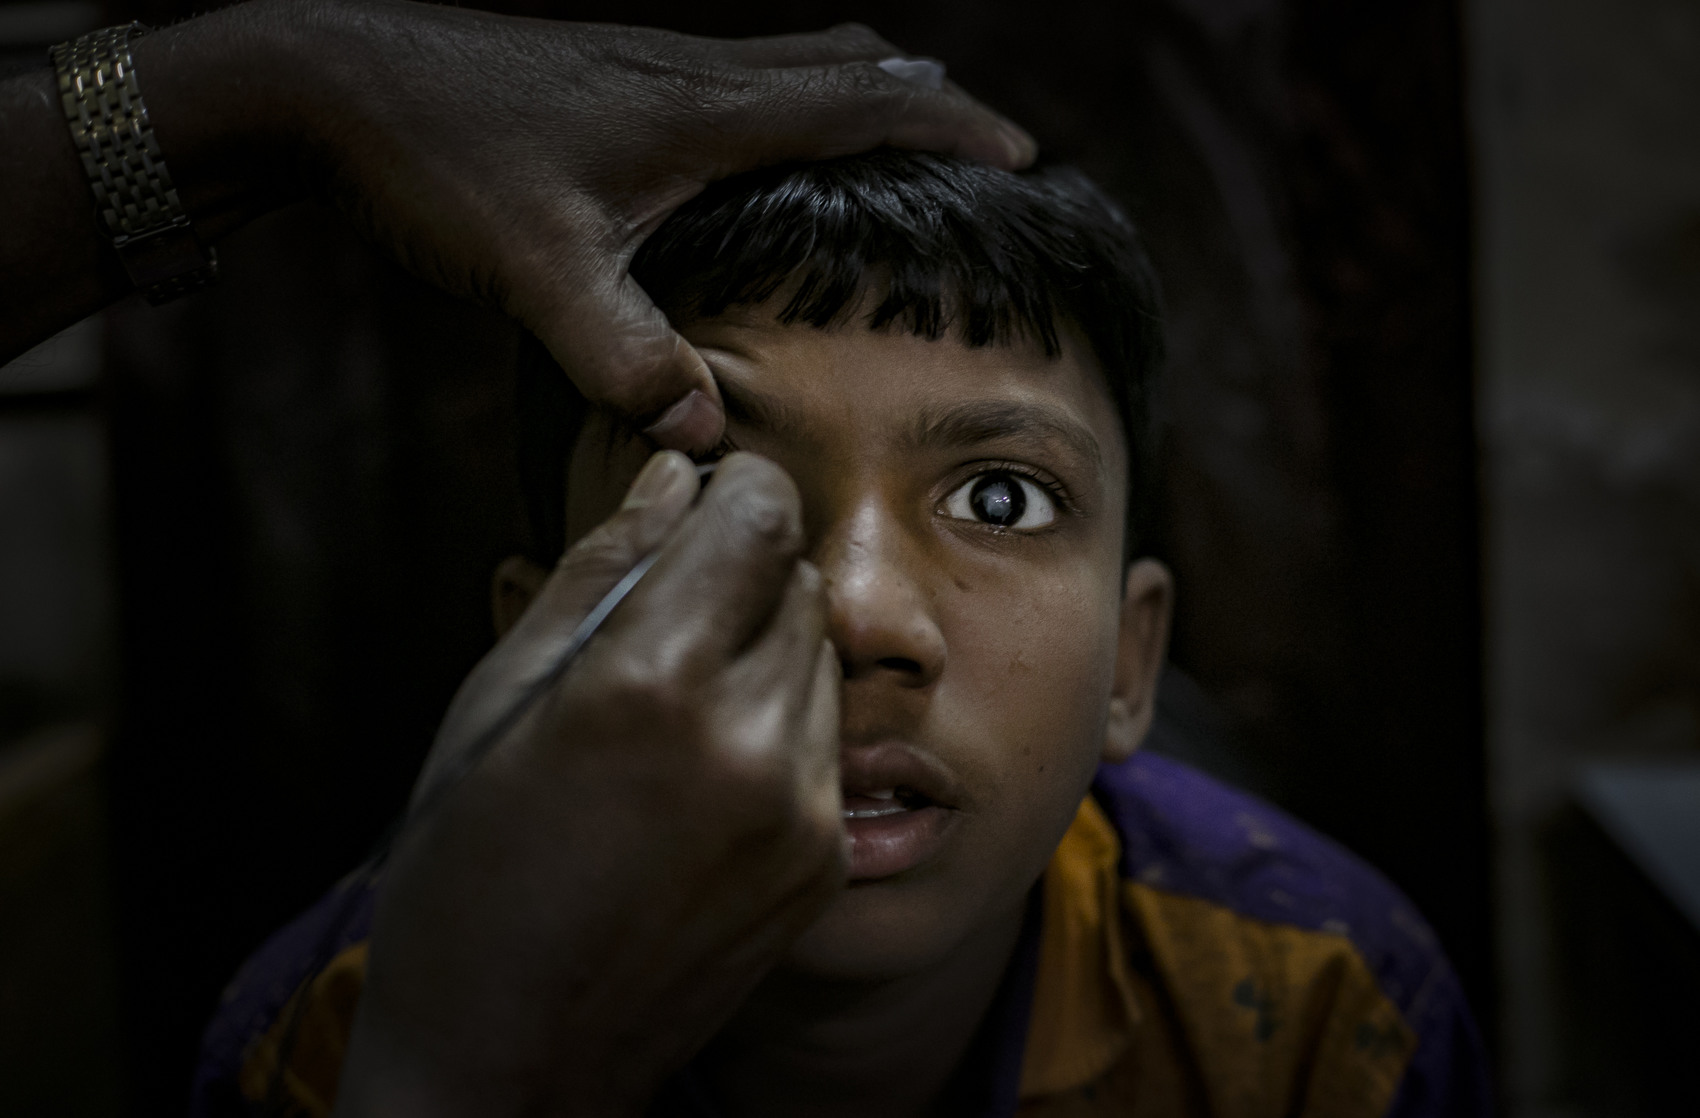 11 year old Rashed is examined before surgery at Khulna hospital March 1, 2017 in Khulna division, Bangladesh. © Sightsavers/Allison Joyce 